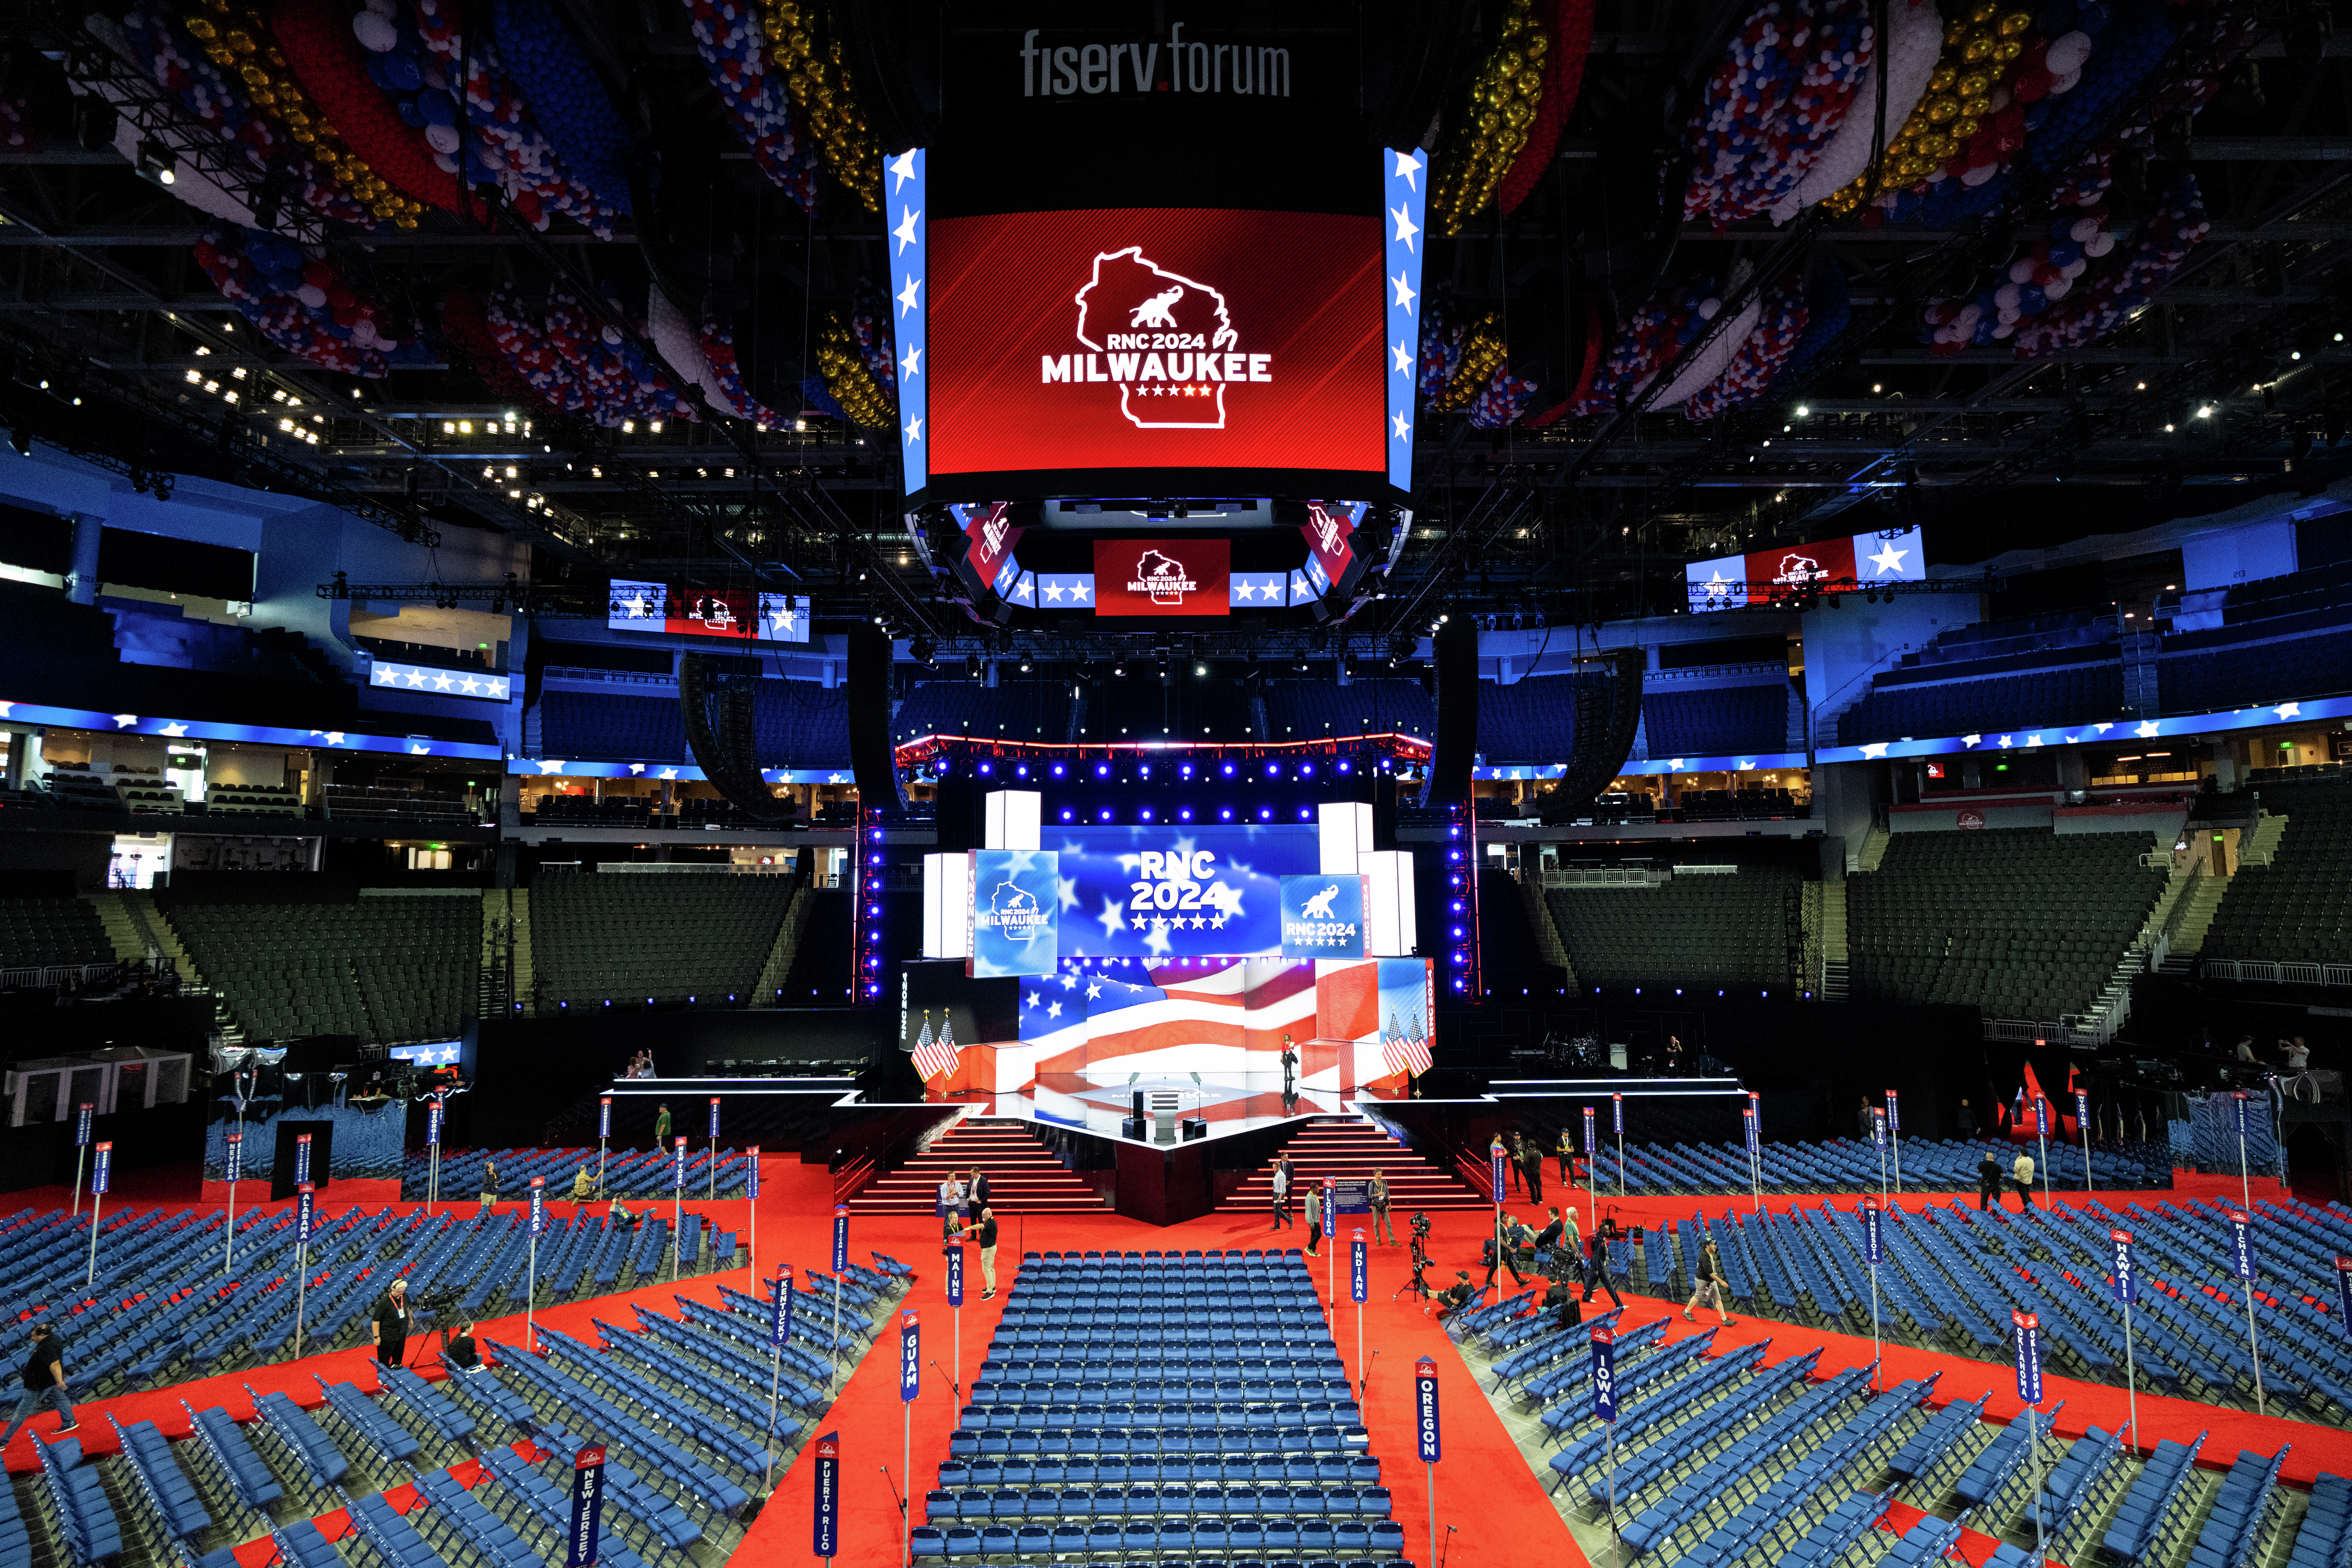 Preparation continues at Republican National Convention after Trump attack